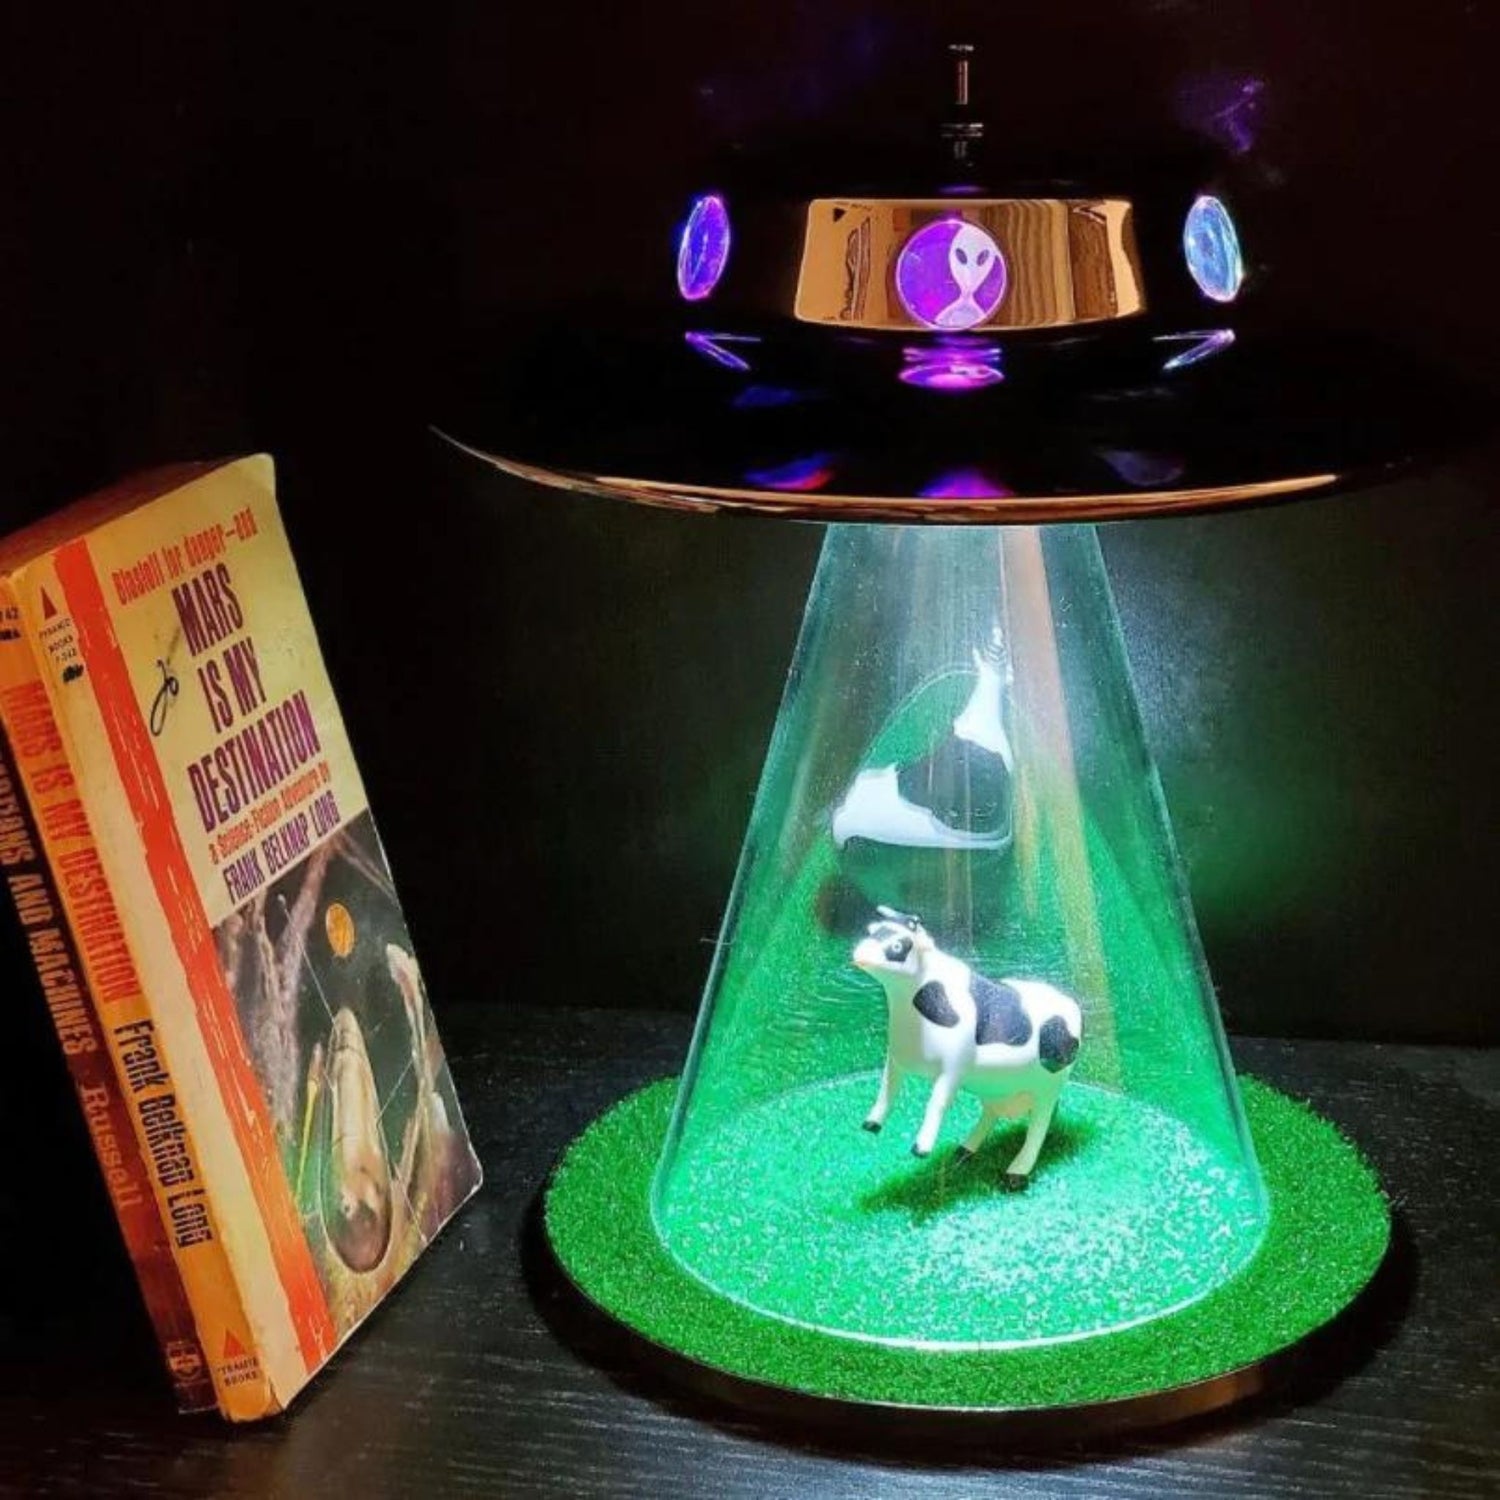 main image - Original UFO Cow Lamp & amazon alien abduction table desk lamp with grass, cow and flying UFO saucer LED RGB night light